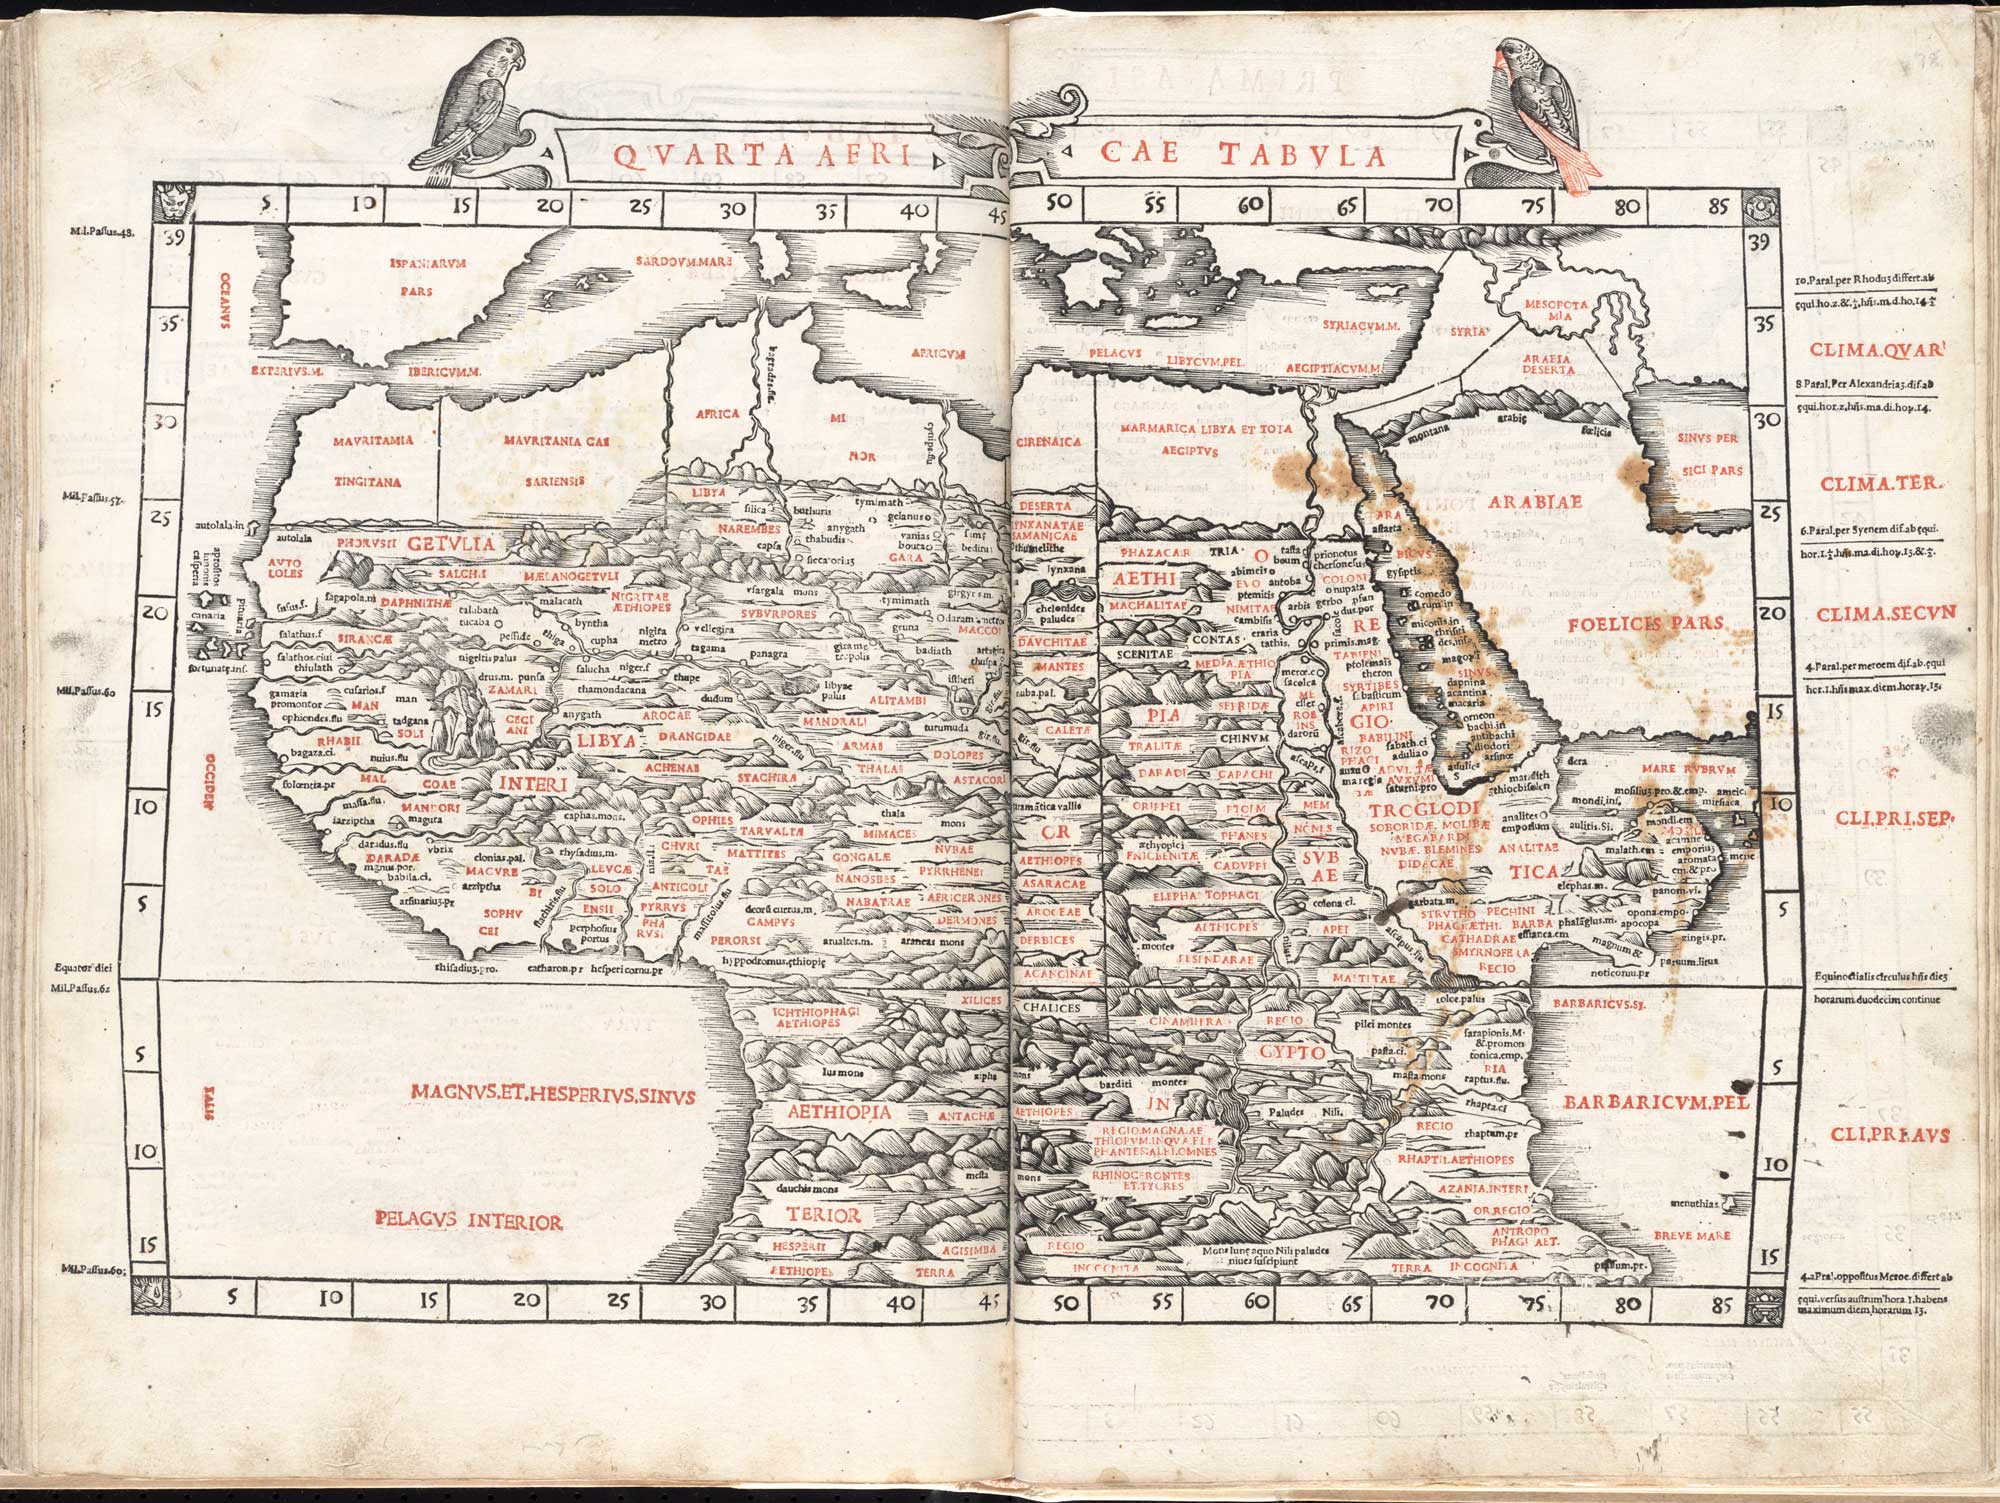 Map of northern Africa from 1511 edition of Ptolemy’s Geography